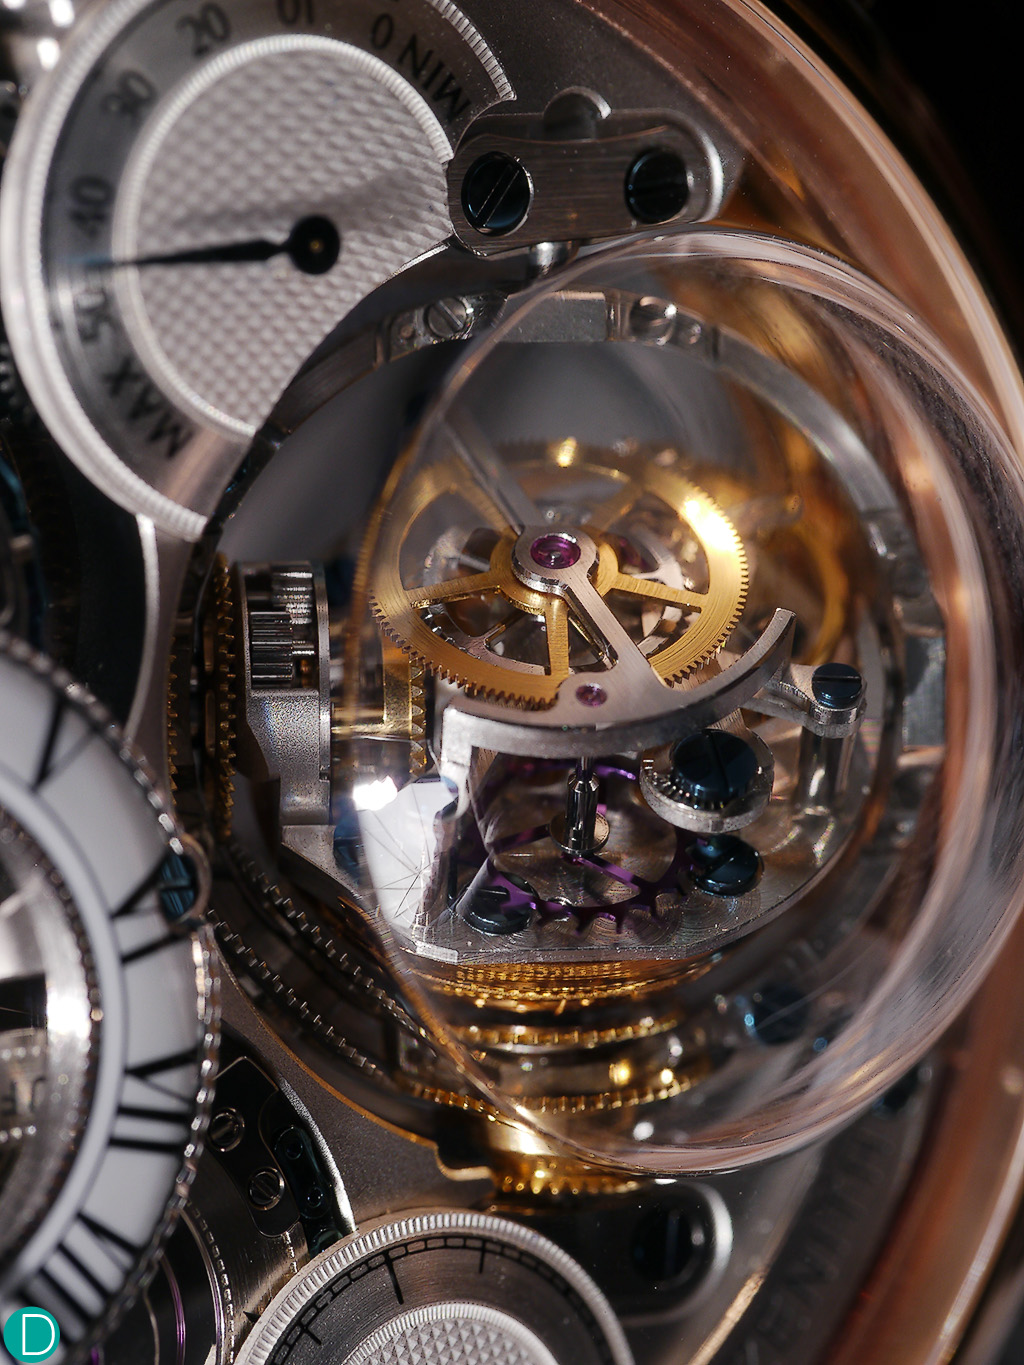 The gymbal system, which Zenith calls the gyroscope allows the escapement to keep a horizontal position regardless of the position of the case.